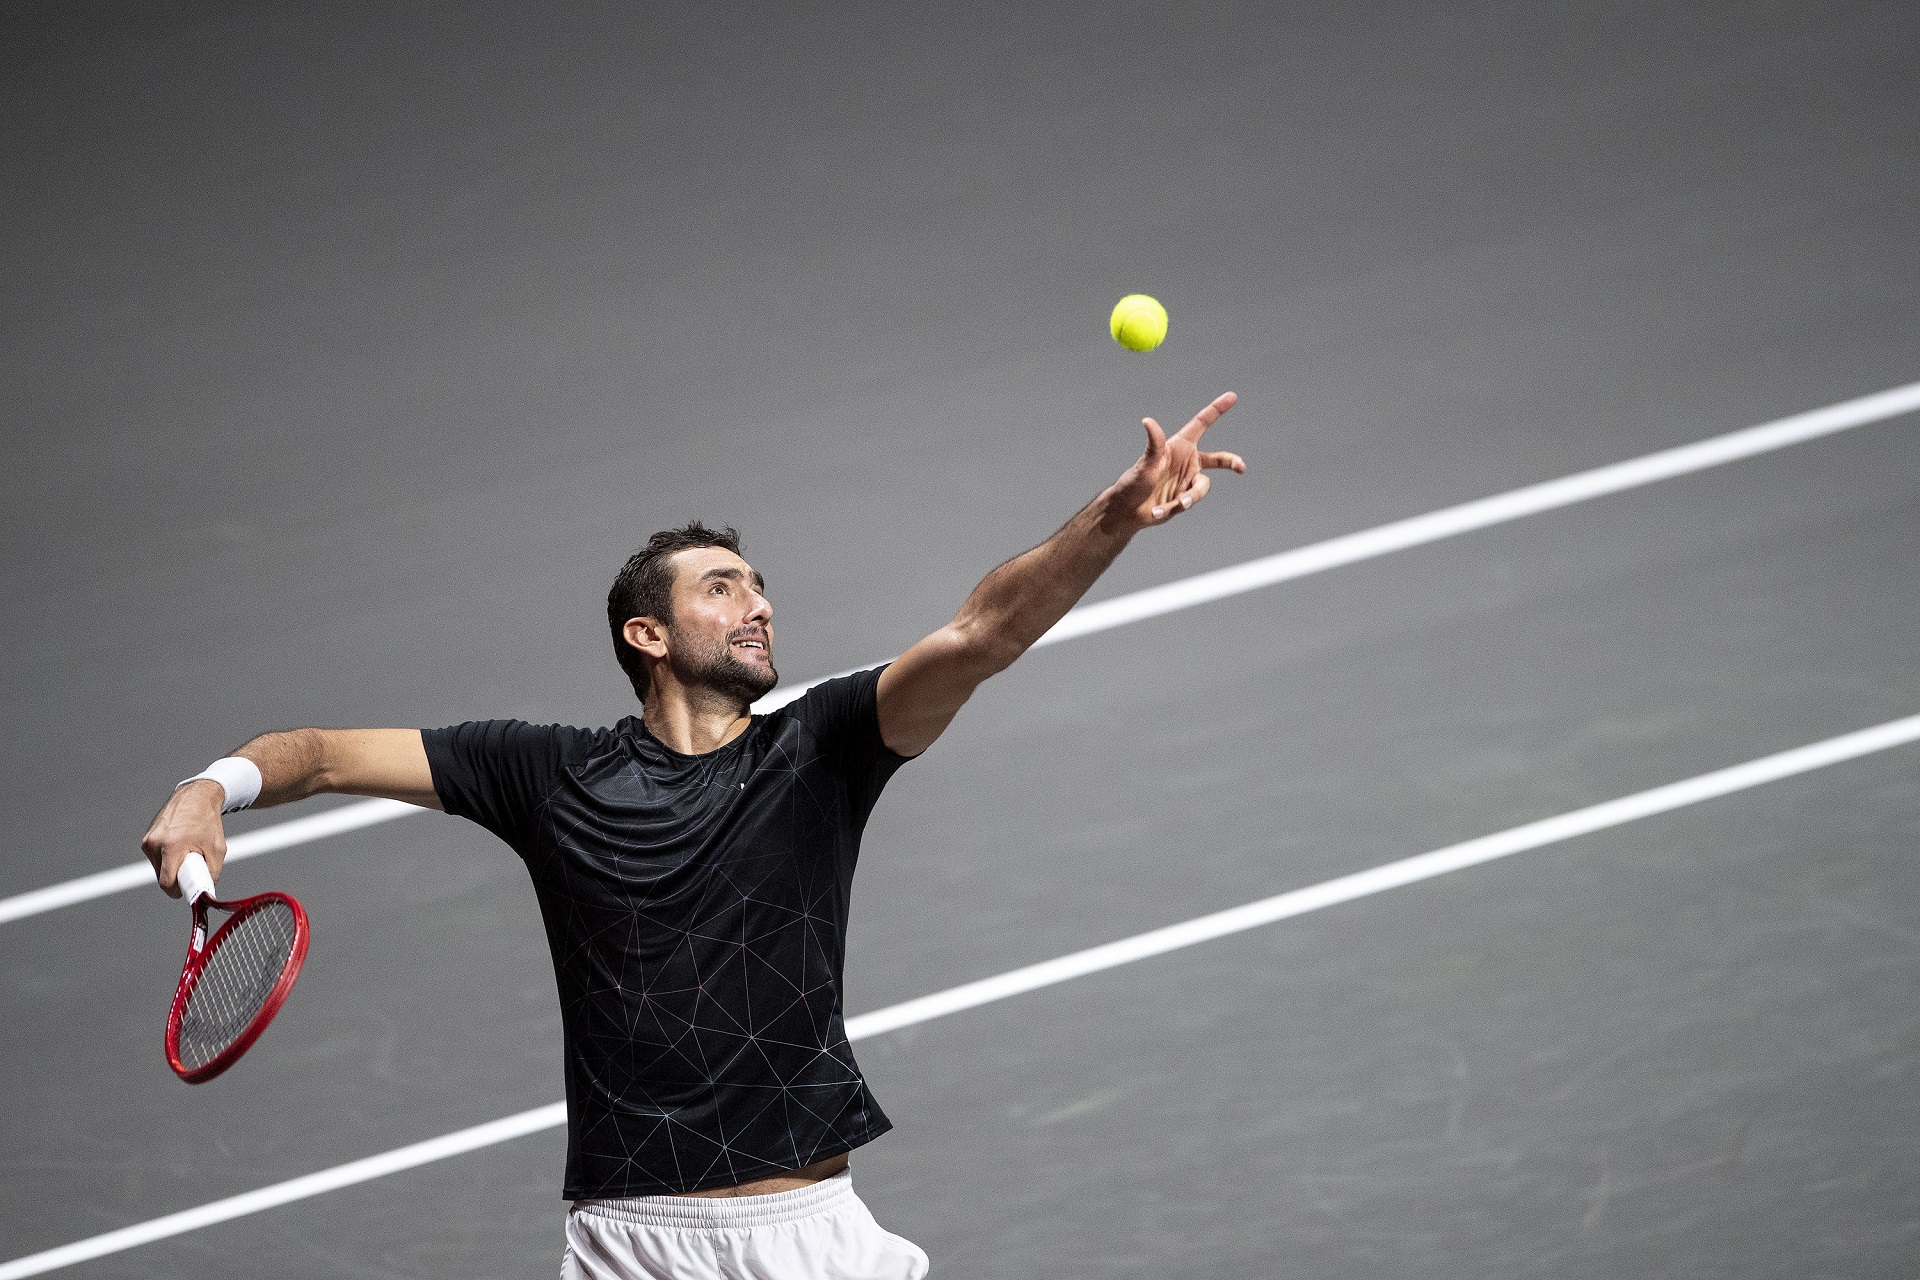 13 October 2020, Cologne: Croatian tennis player Marin Cilic in action against Spanish Alejandro Davidovich Fokina
during their men's singles round of 16 tennis match at the 2020 Bett1Hulks Indoors of the ATP tournament. Photo: Marius Becker/dpa